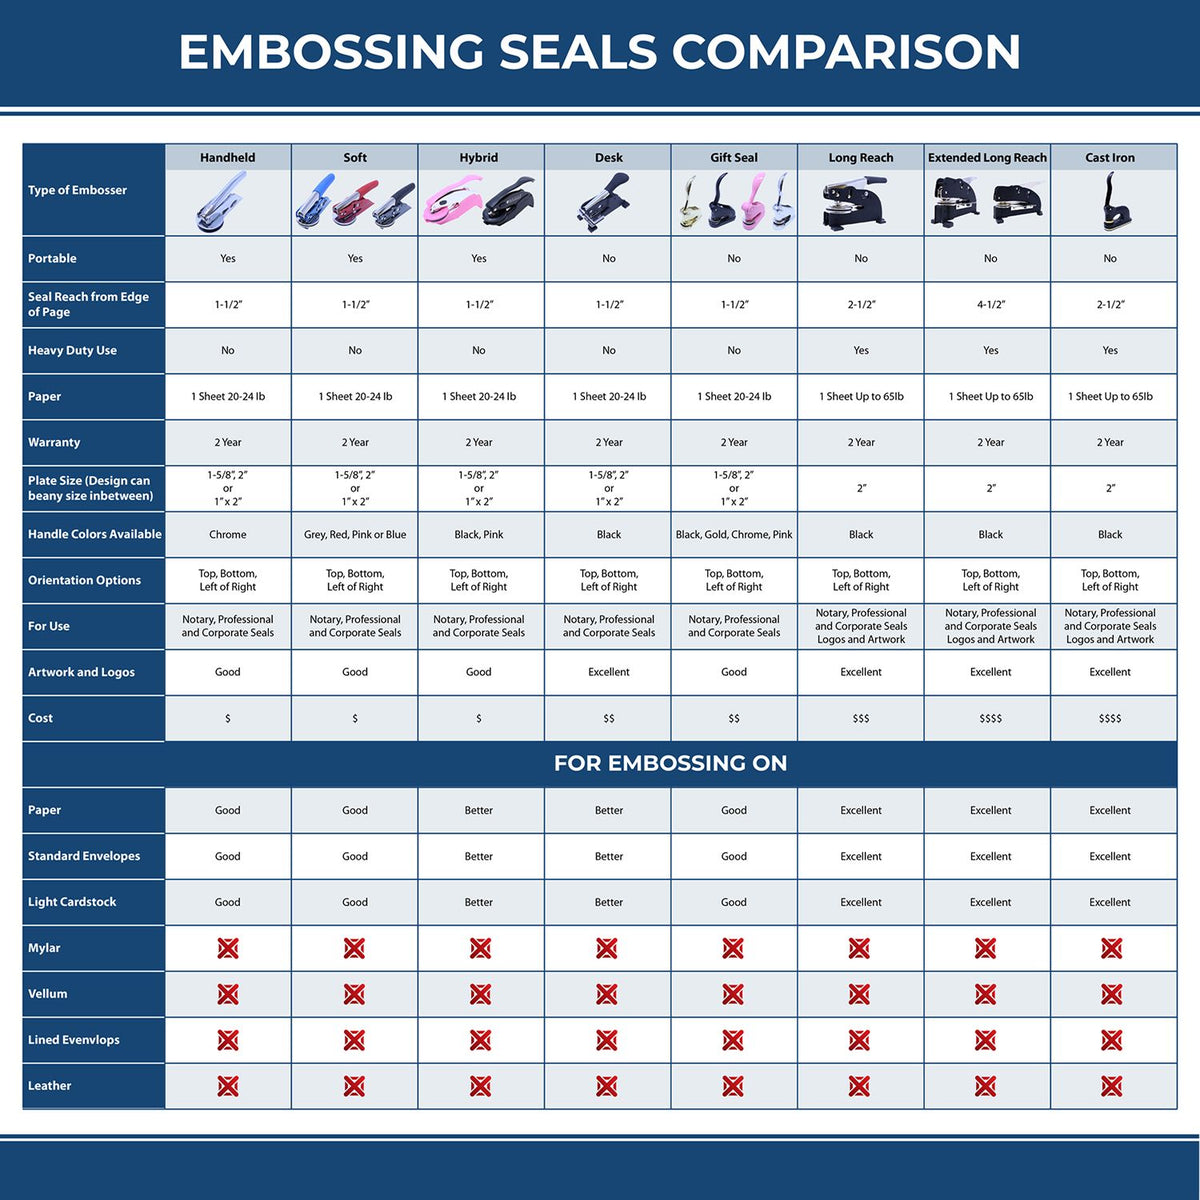 A comparison chart for the different types of mount models available for the State of Arizona Long Reach Architectural Embossing Seal.